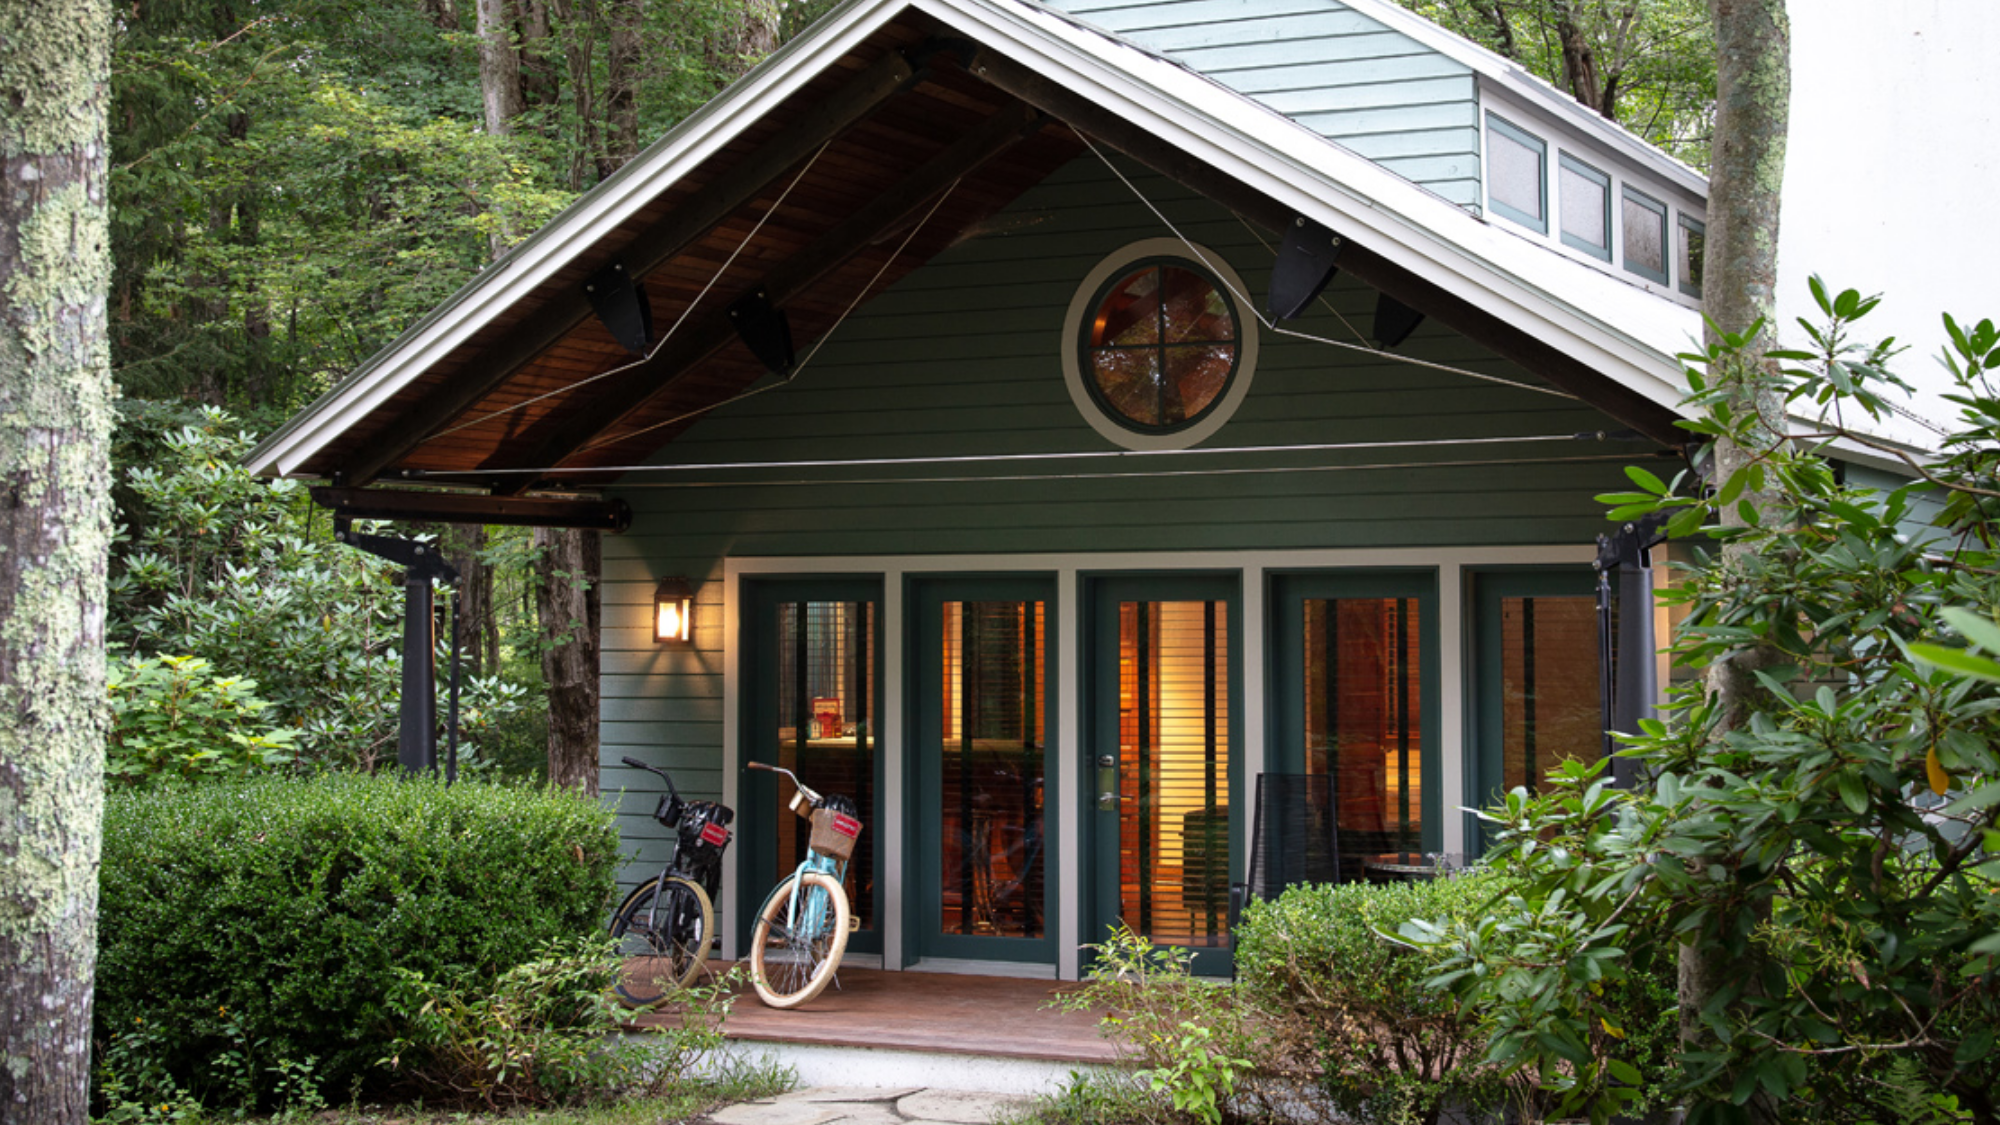 Exterior of the Maritime Cottage at Winvian Farm with bicycles on the porch.